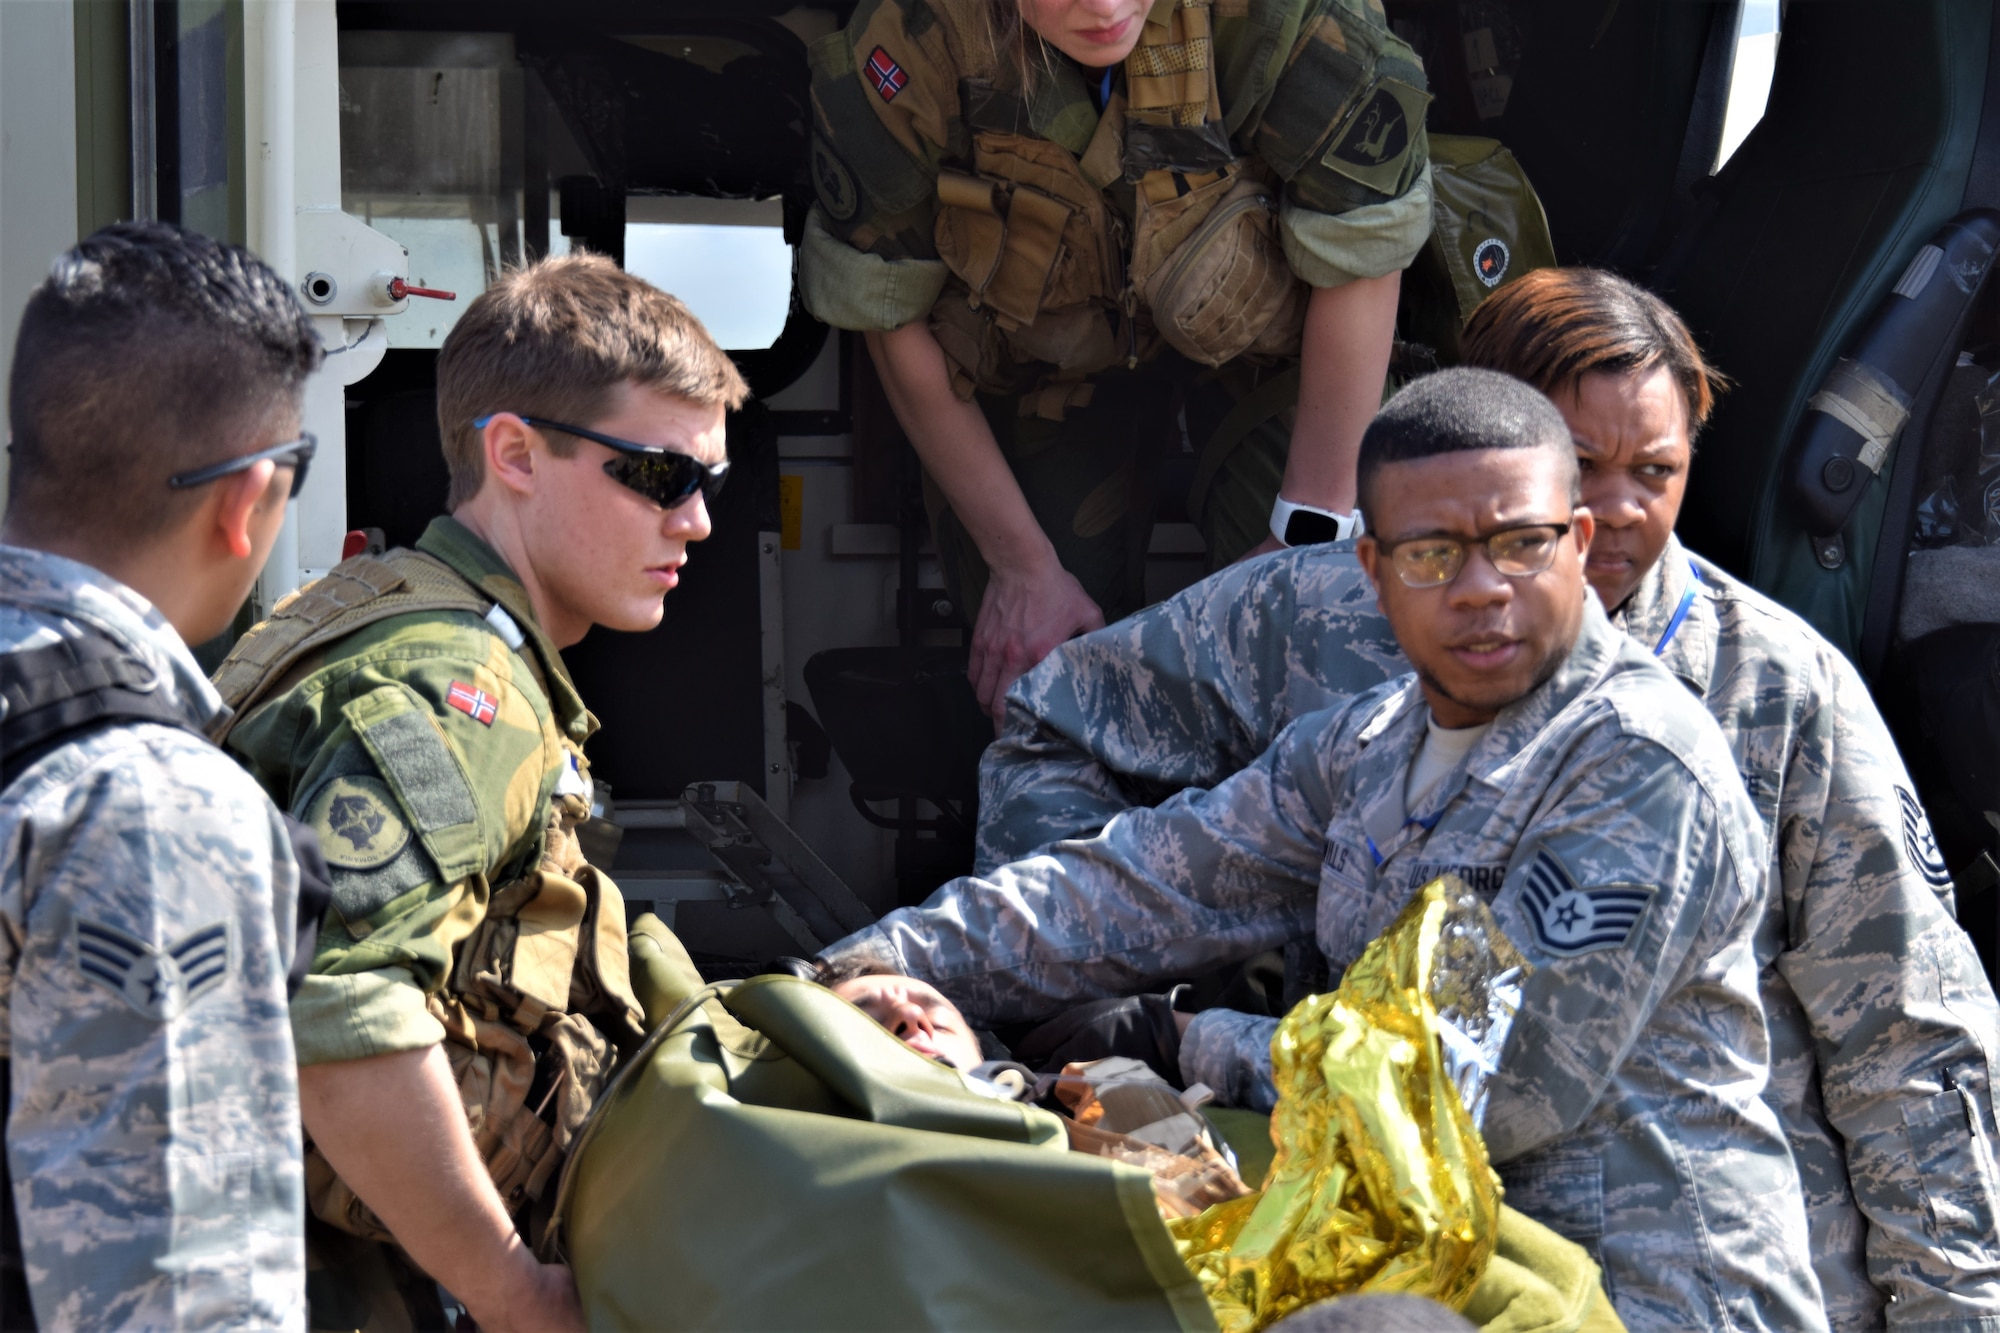 Vigorous Warrior 19 is NATO’s largest-ever military medical exercise, uniting more than 2,500 participants from 39 countries to exercise experimental doctrinal concepts and test their medical assets together in a dynamic, multinational environment. (U.S. Air Force photo by 1st Lt. Andrew Layton)